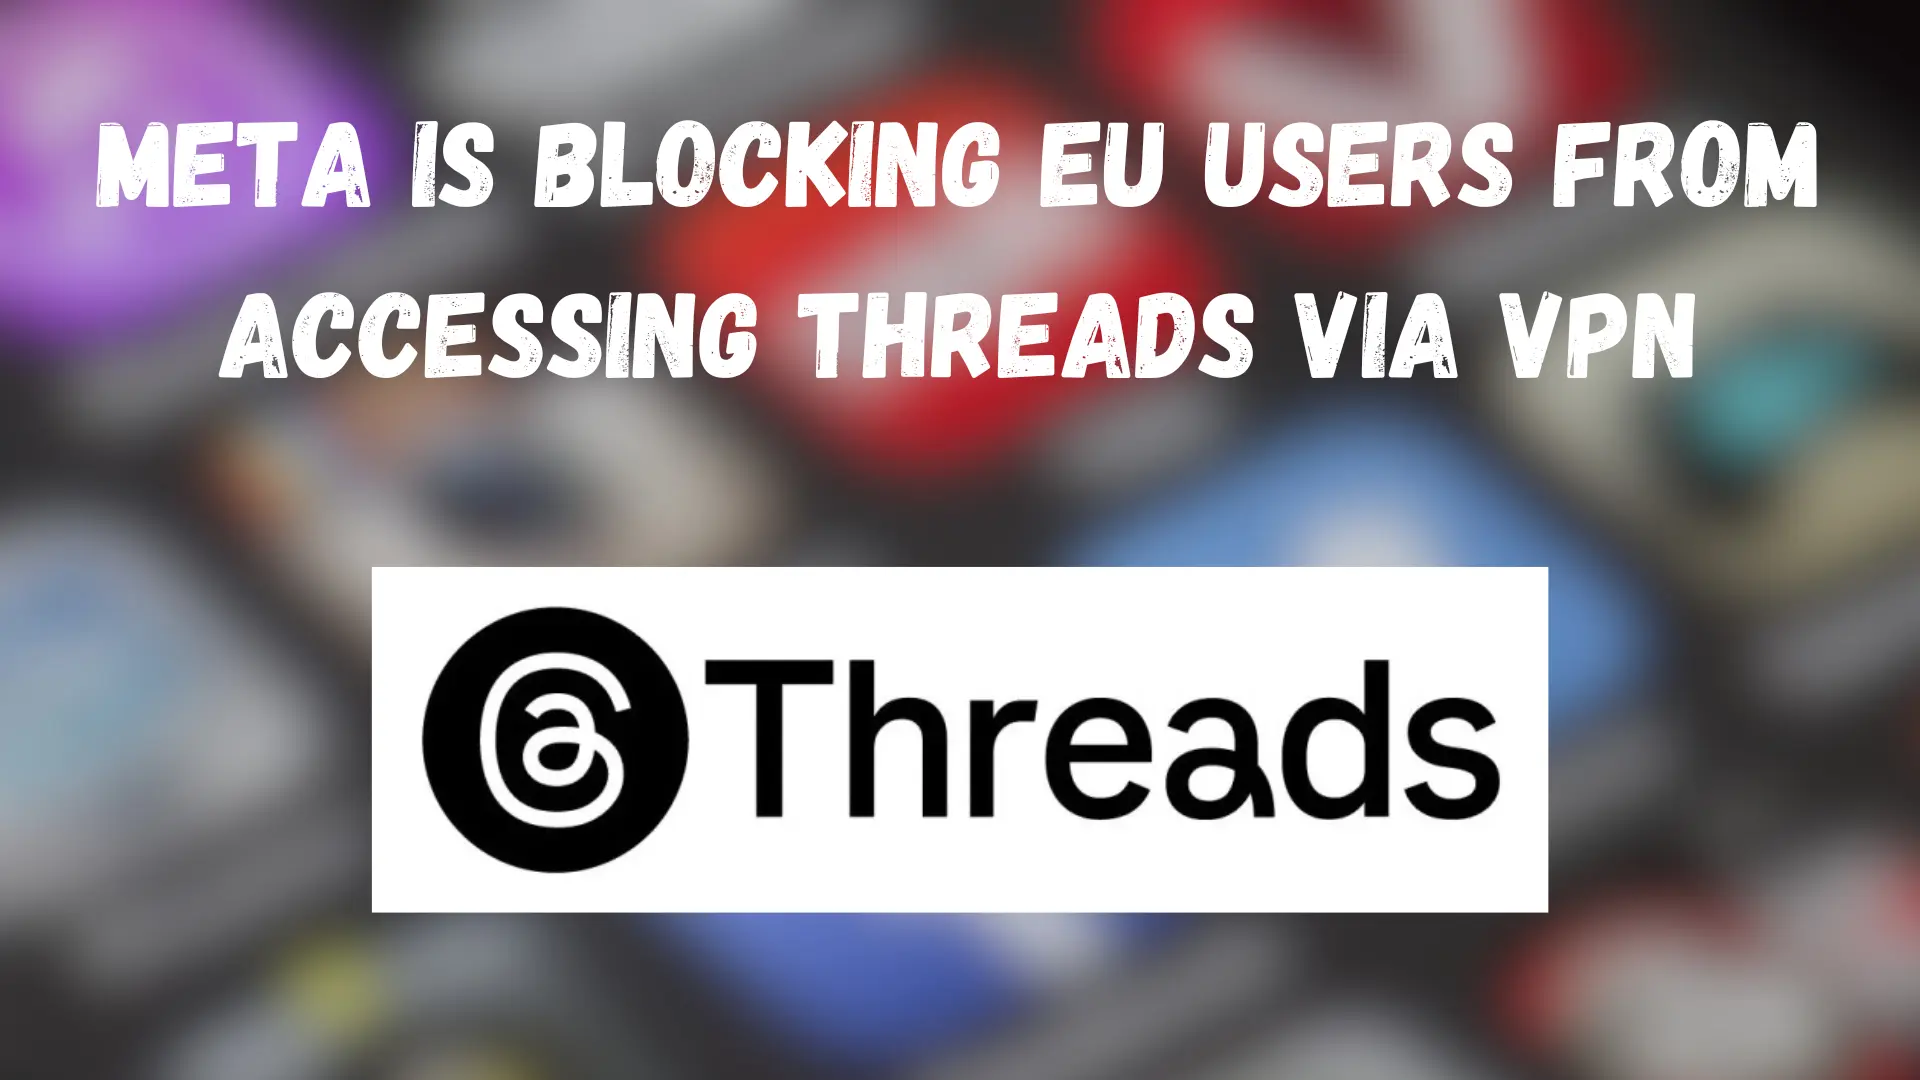 Meta is Blocking EU Users from Accessing Threads via VPN